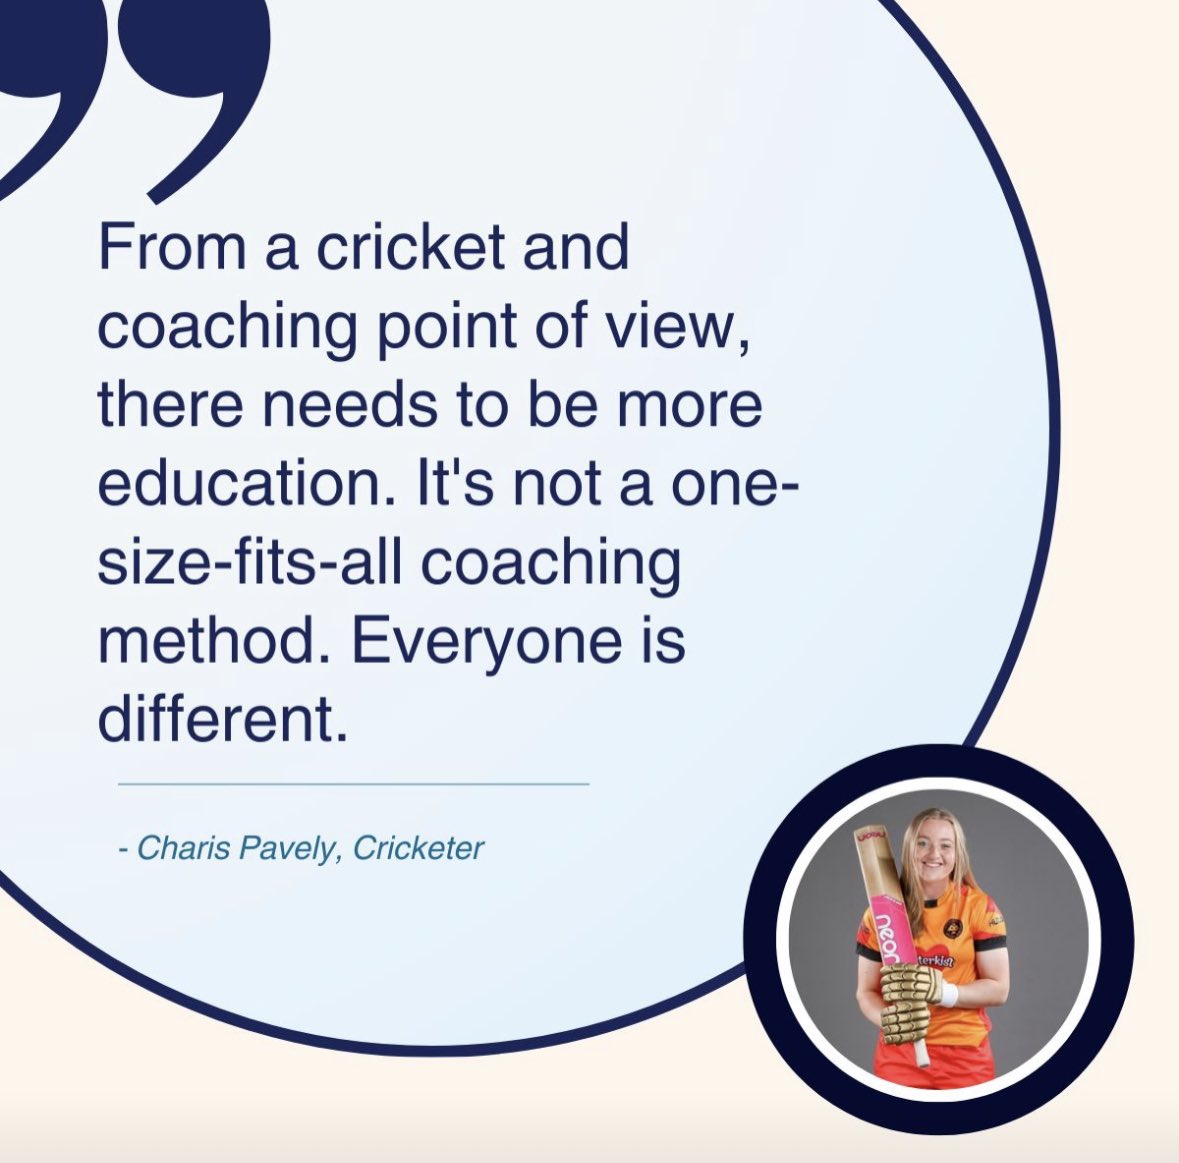 Understanding neurodiversity like ADHD is 1st step toward creating an inclusive & supportive society: everyone's brain functions differently, and these differences should not be stigmatised. Read Charis Pavely’s story: bbc.co.uk/sport/cricket/… #ADHDAwarenessMonth #redefinehealth